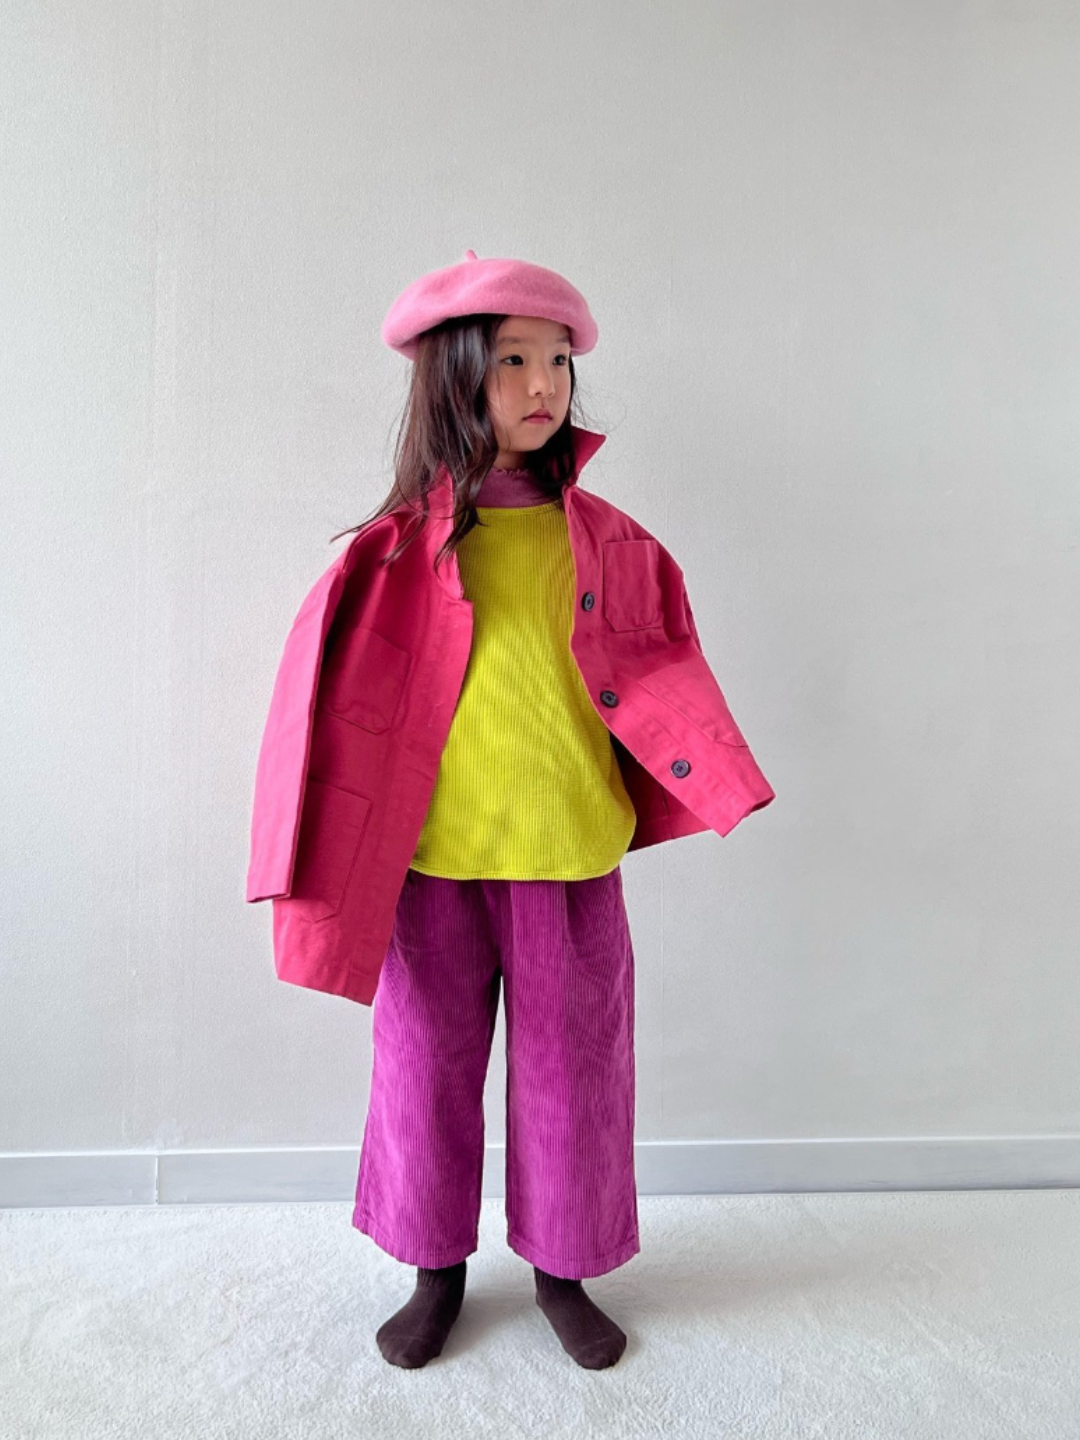 A child wearing wide-leg corduroy pants in magenta pink, paired with a bright yellow shirt, pink jacket and light pink beret. She is standing on grey carpet against a white wall..